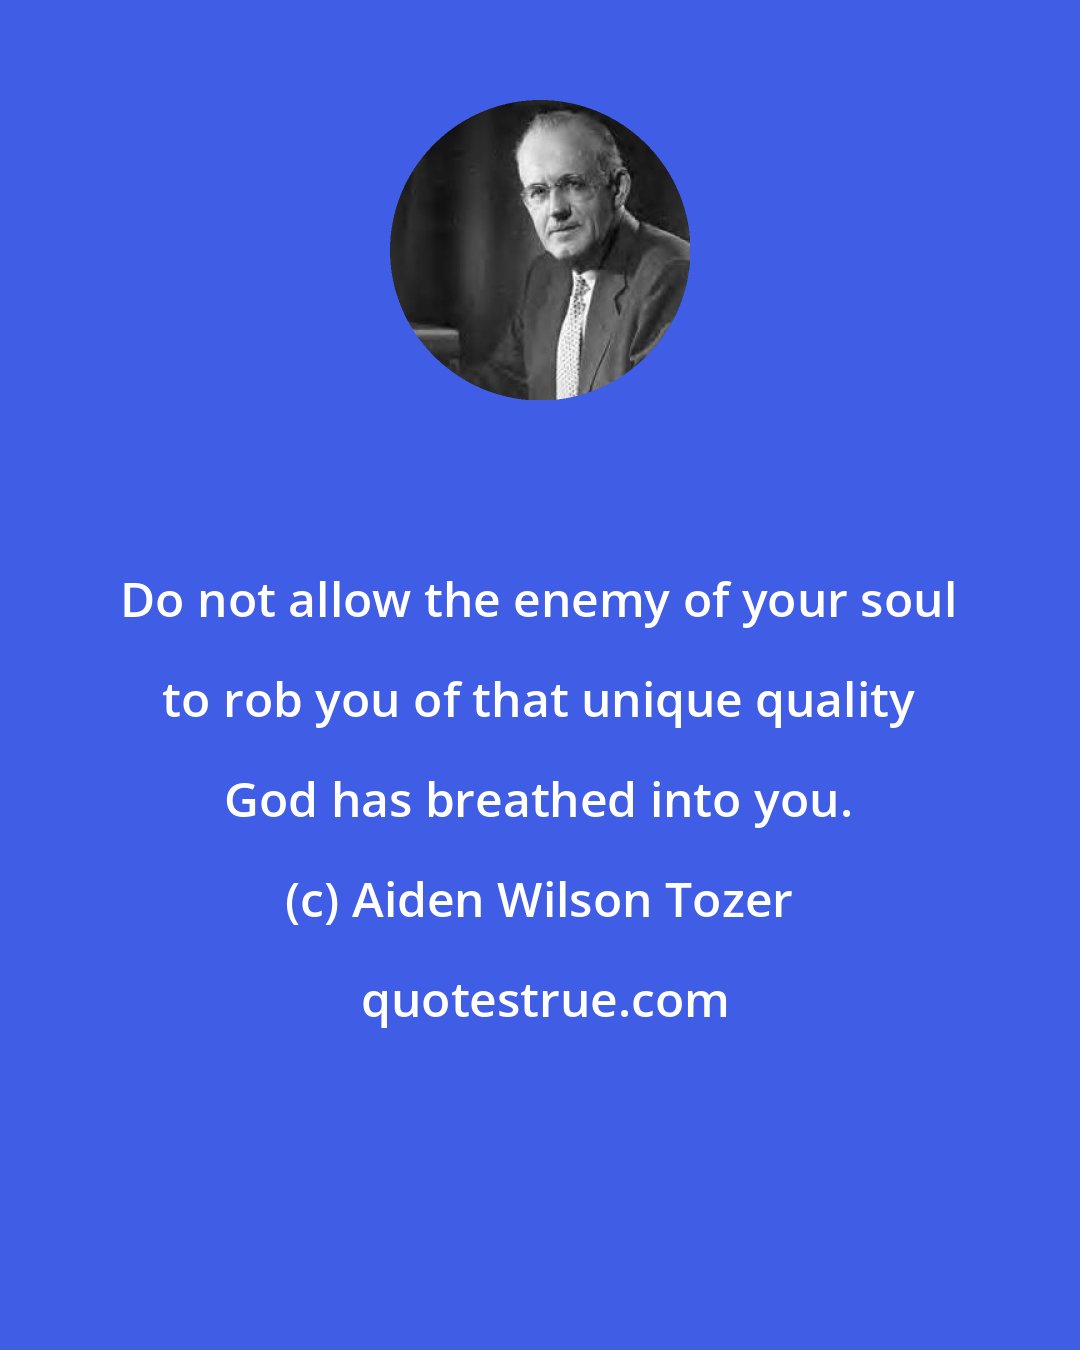 Aiden Wilson Tozer: Do not allow the enemy of your soul to rob you of that unique quality God has breathed into you.